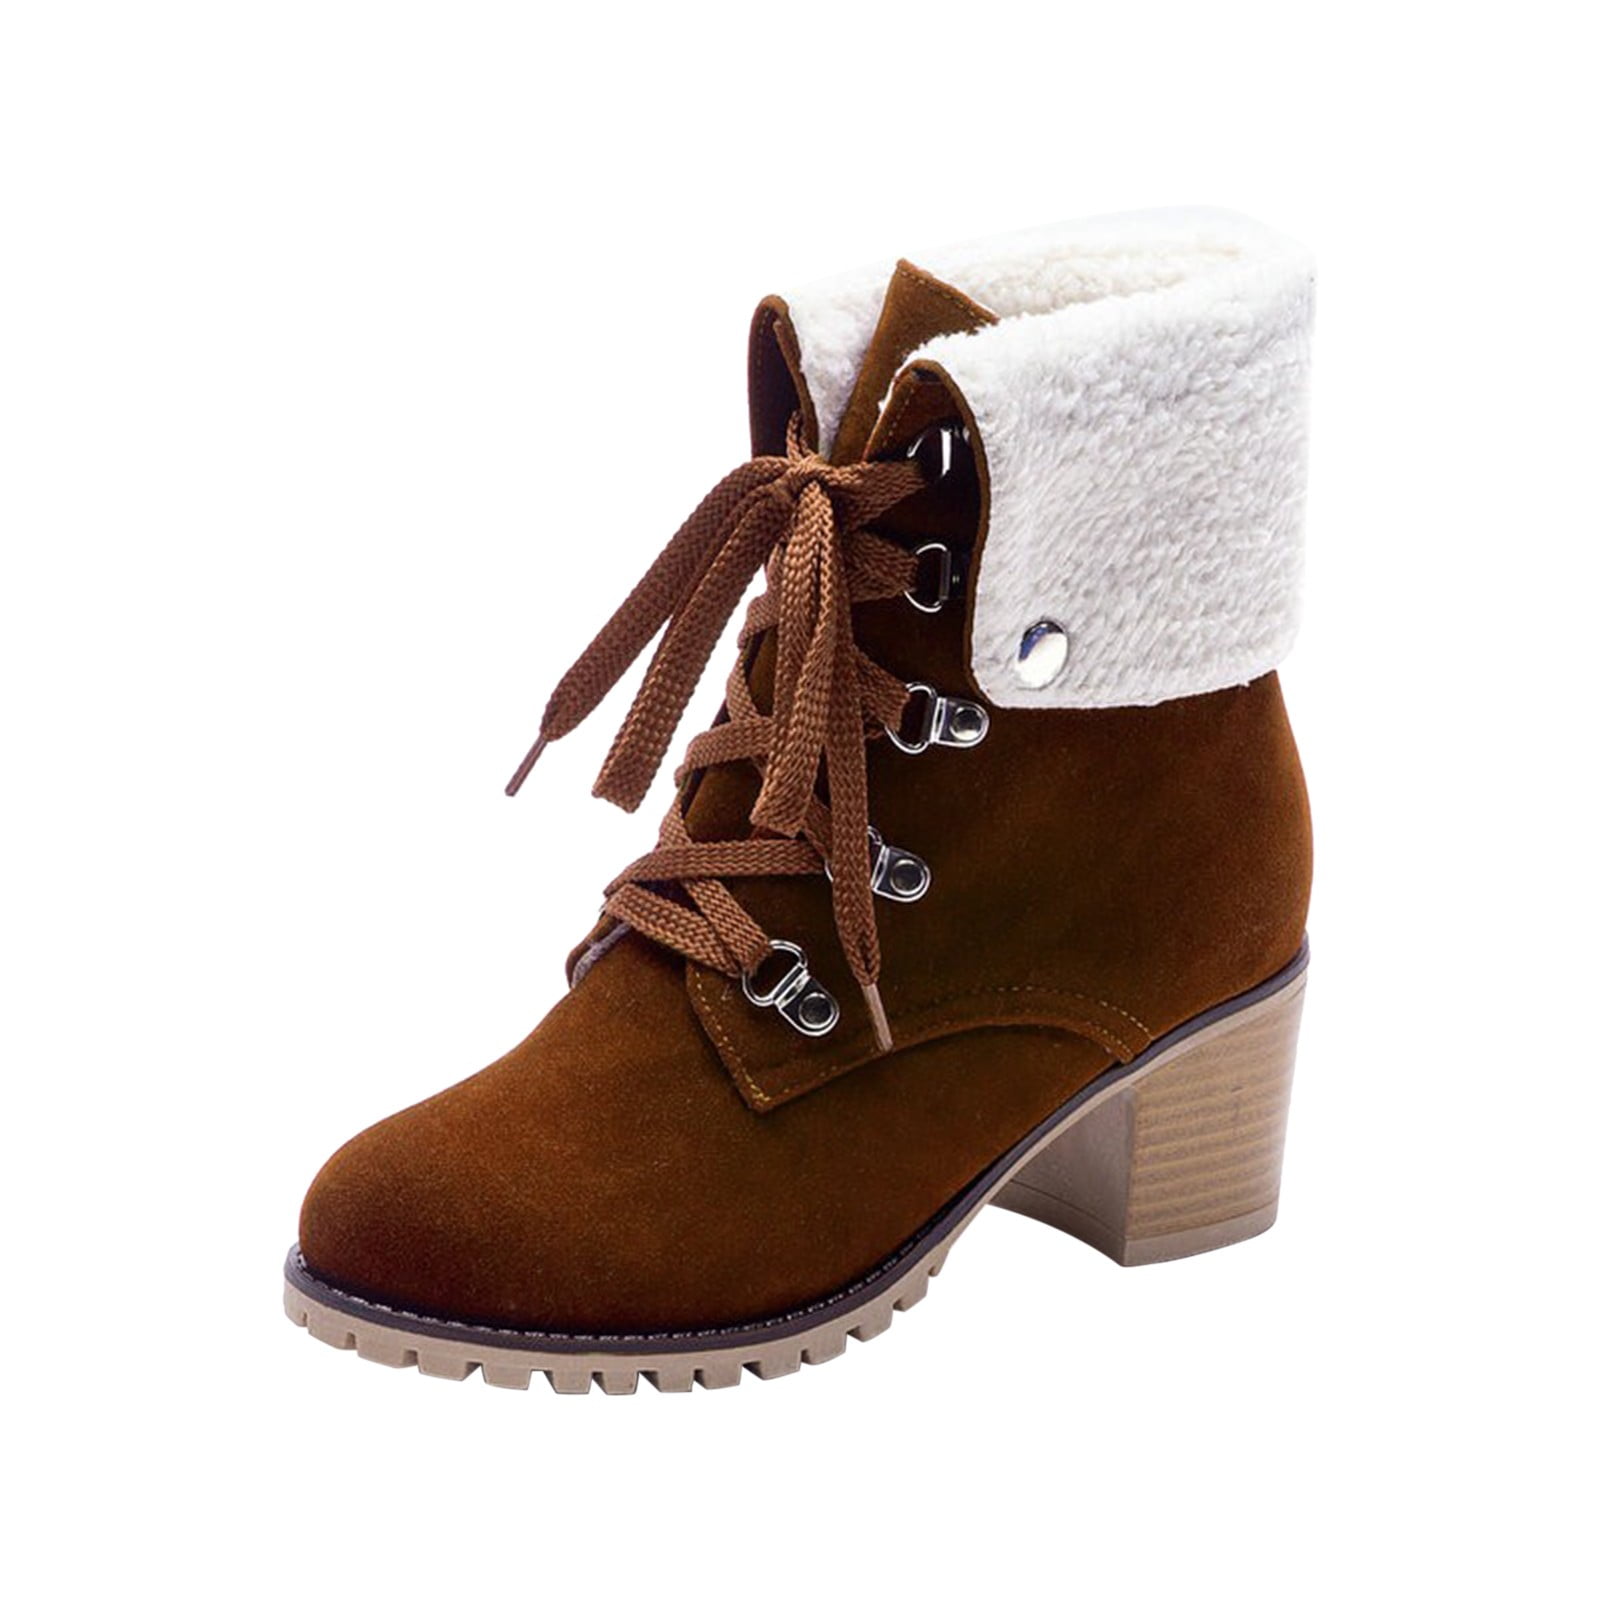 Brown Annay Heeled Ankle Boots - BrandAlley